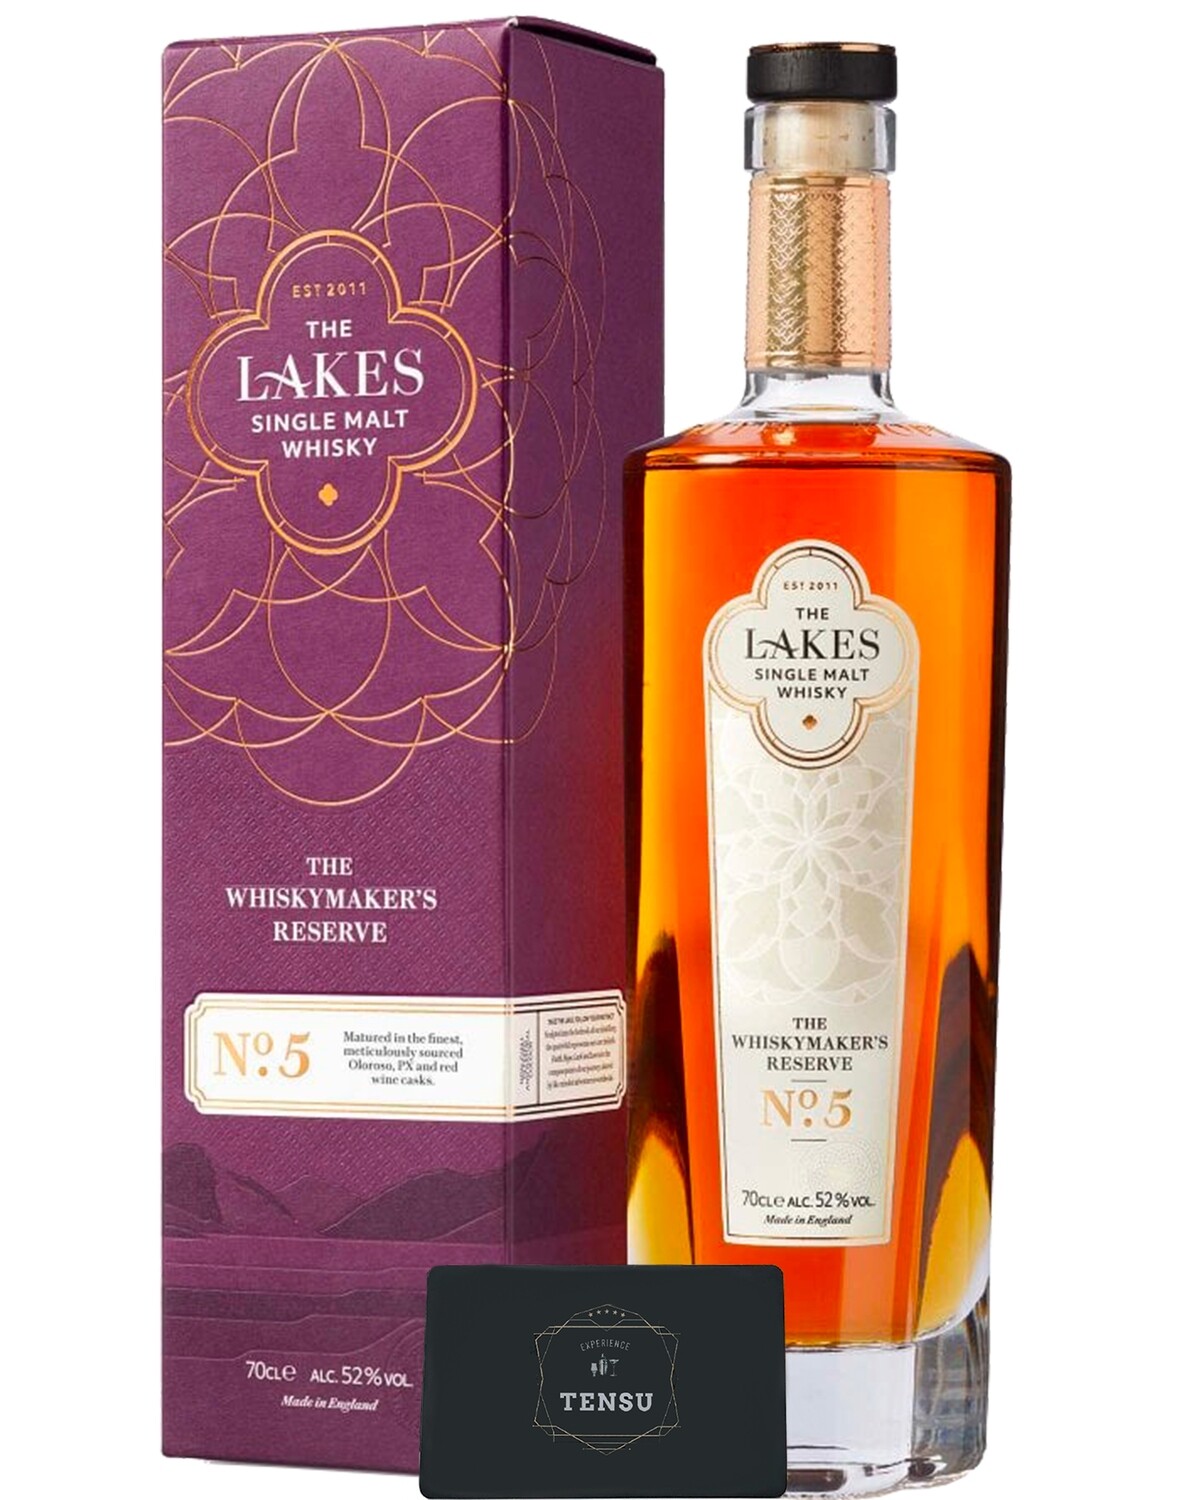 The Lakes - The Whiskymaker's Reserve No.5 52.0 "The Lakes Distillery"